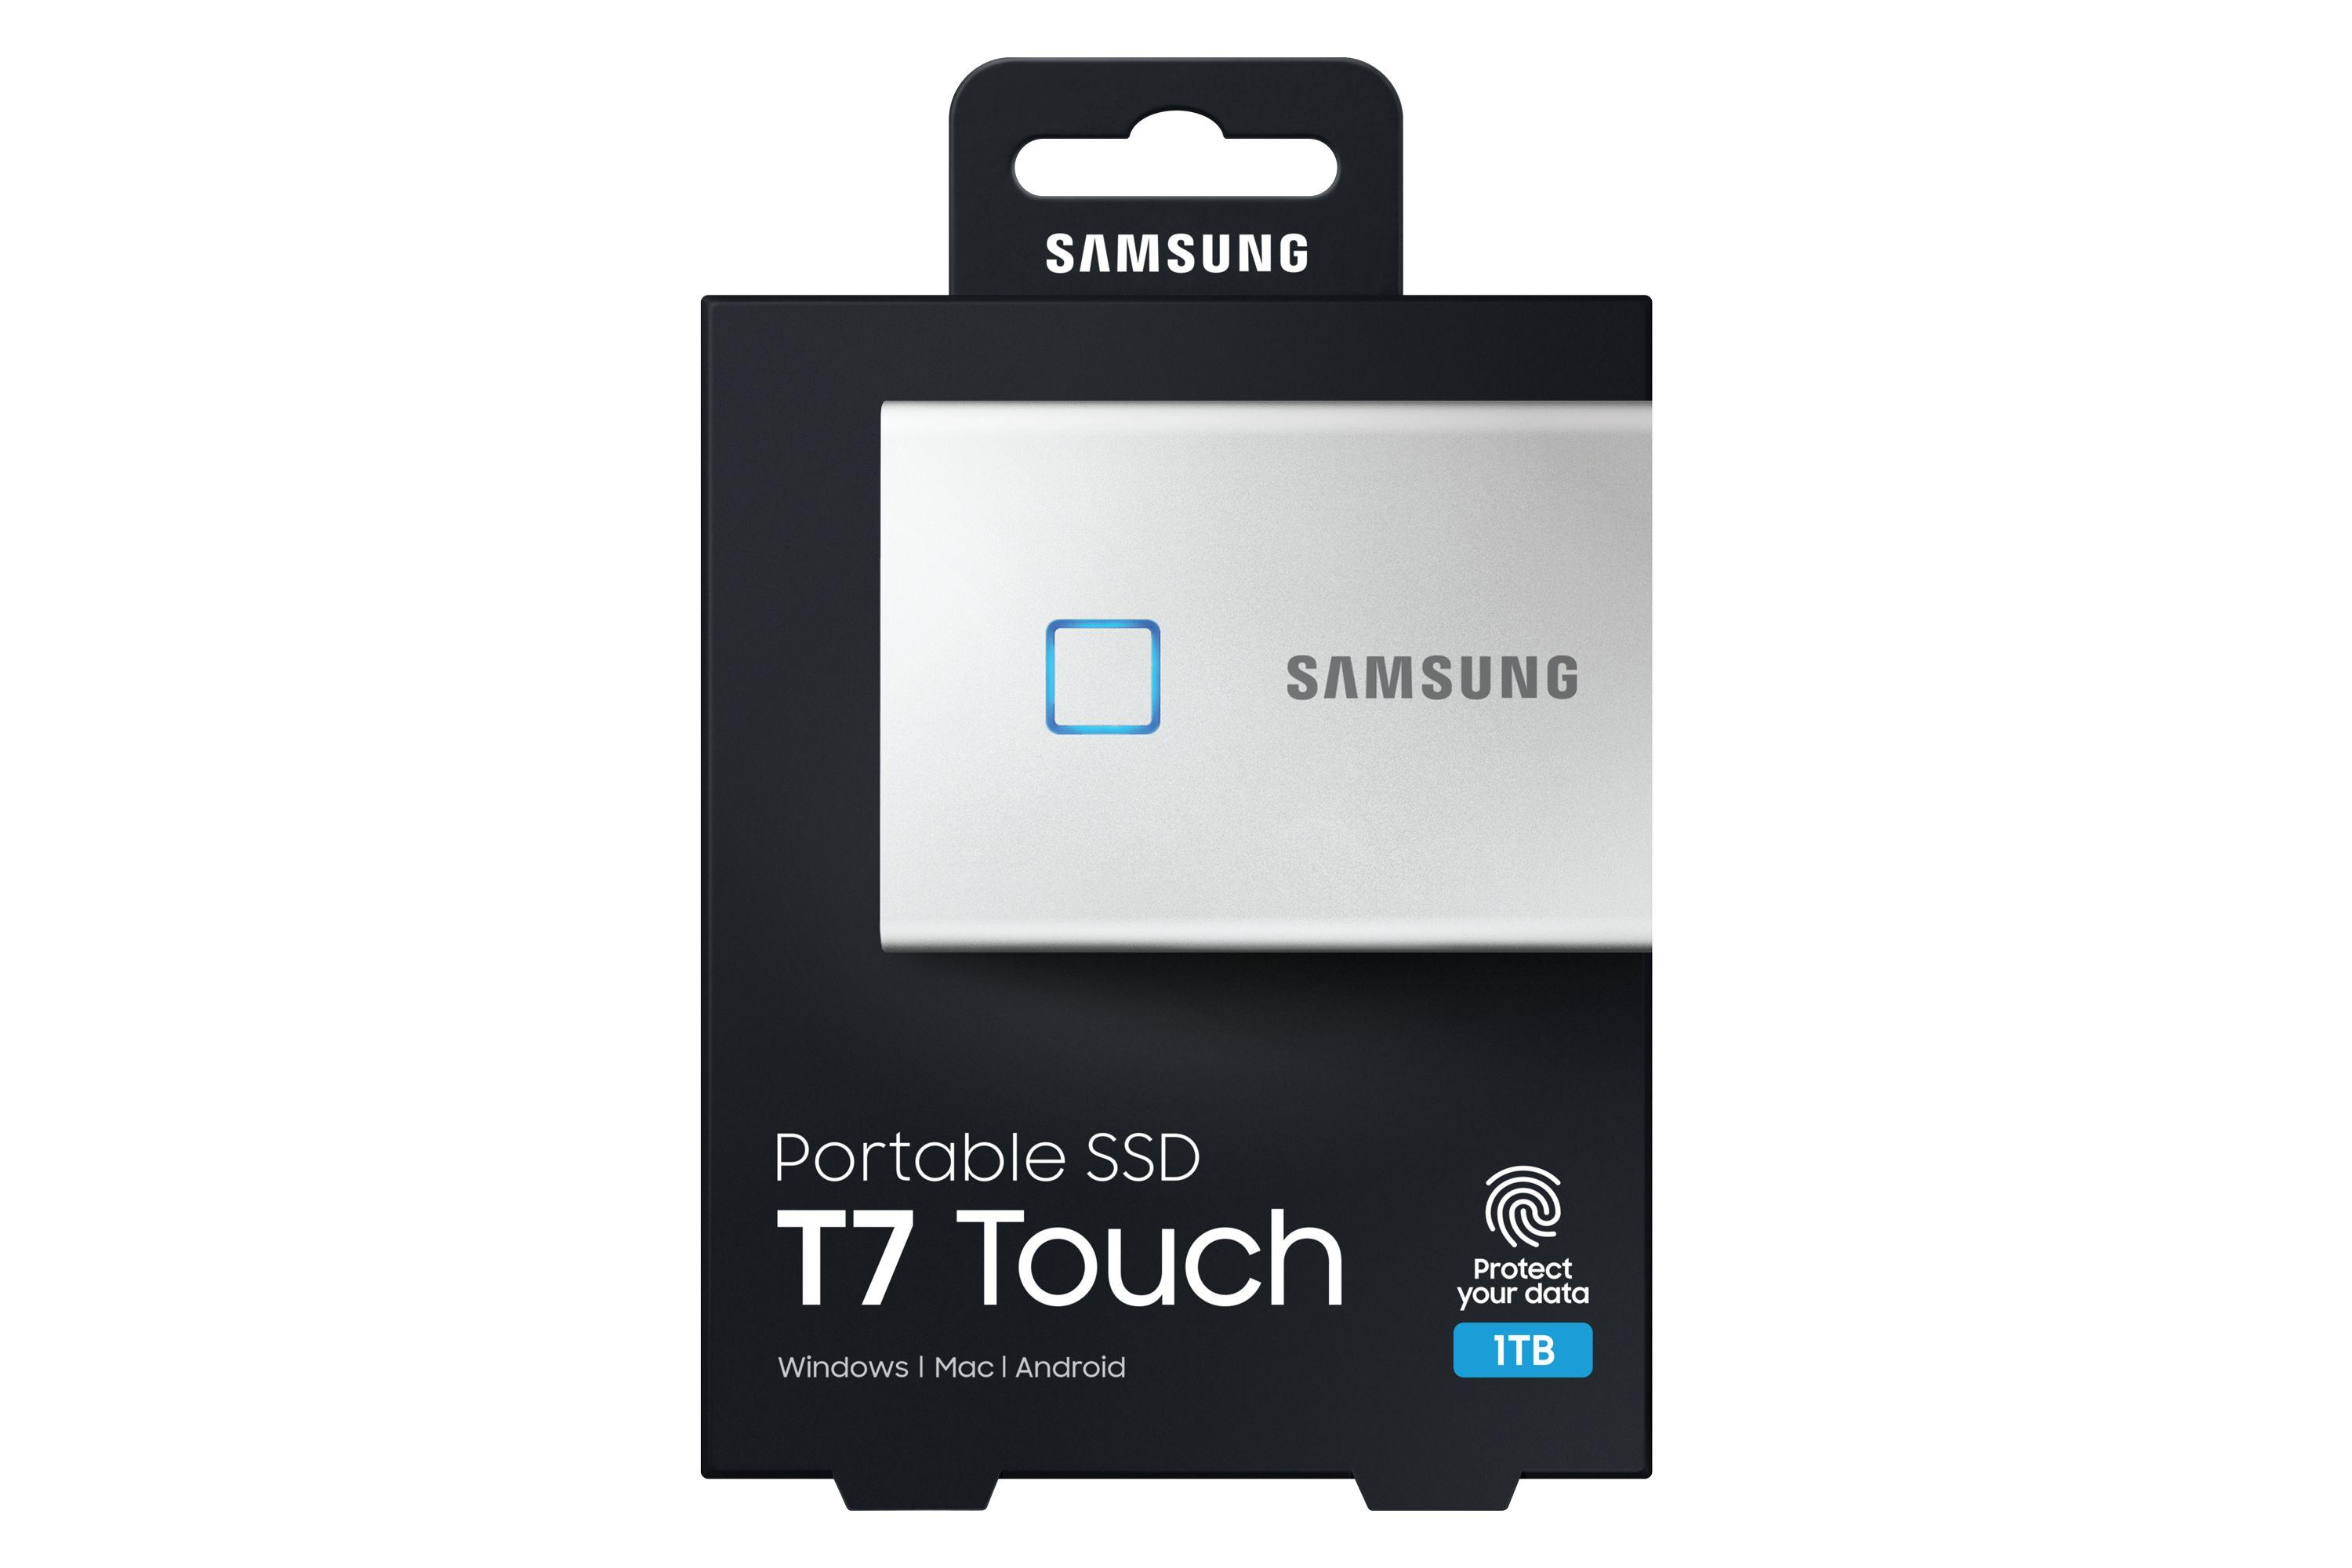 Rejsende købmand privat moronic Samsung Portable SSD T7 Touch 1TB - Silver